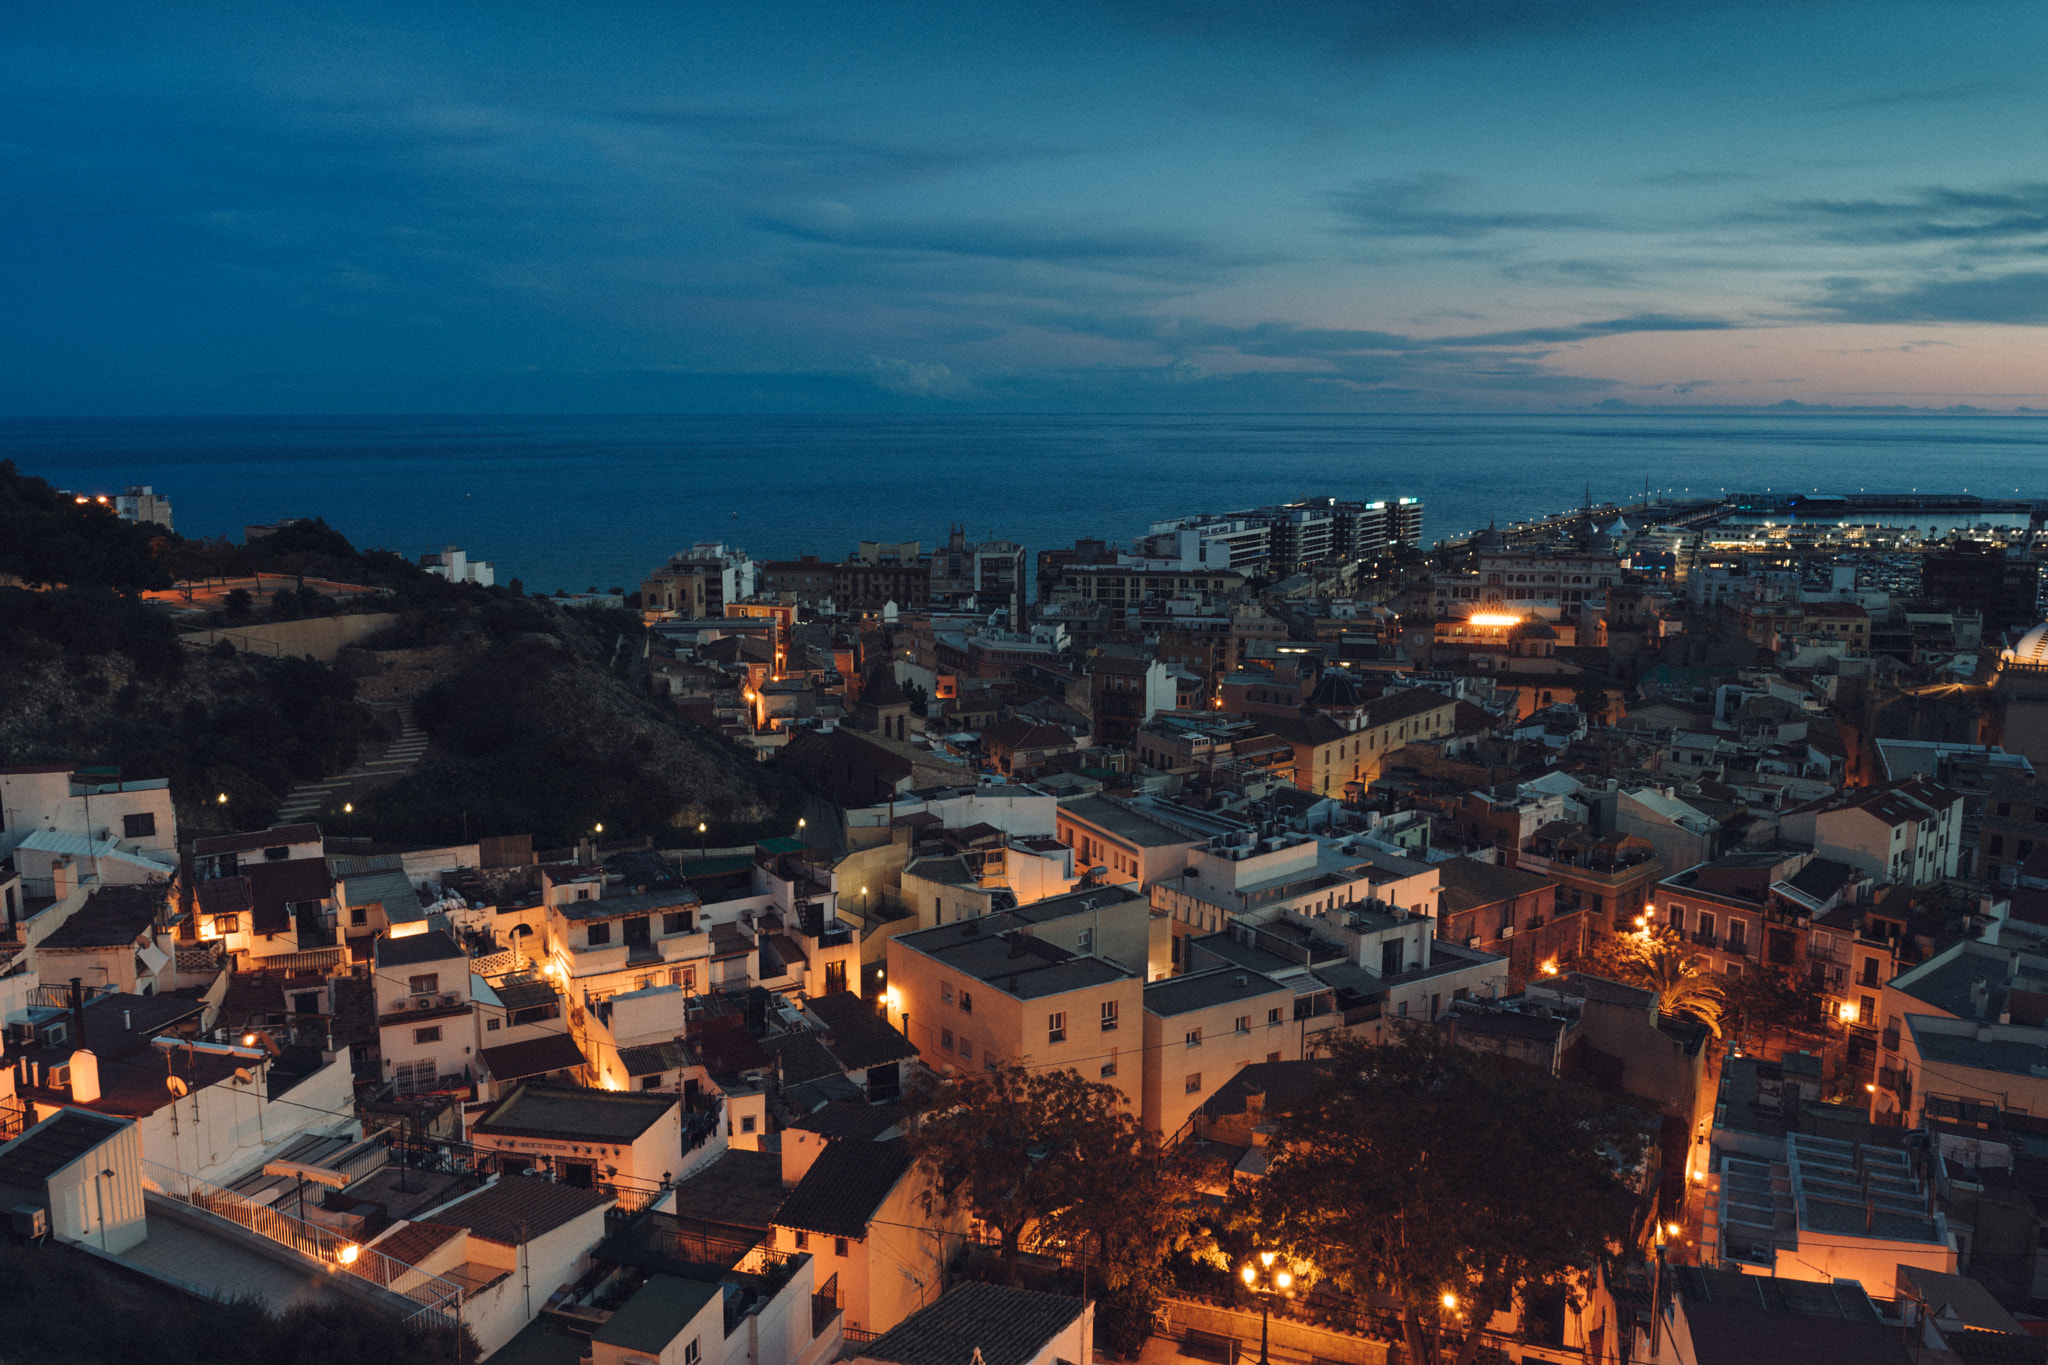 Sony a7 sample photo. Alicante • changes photography